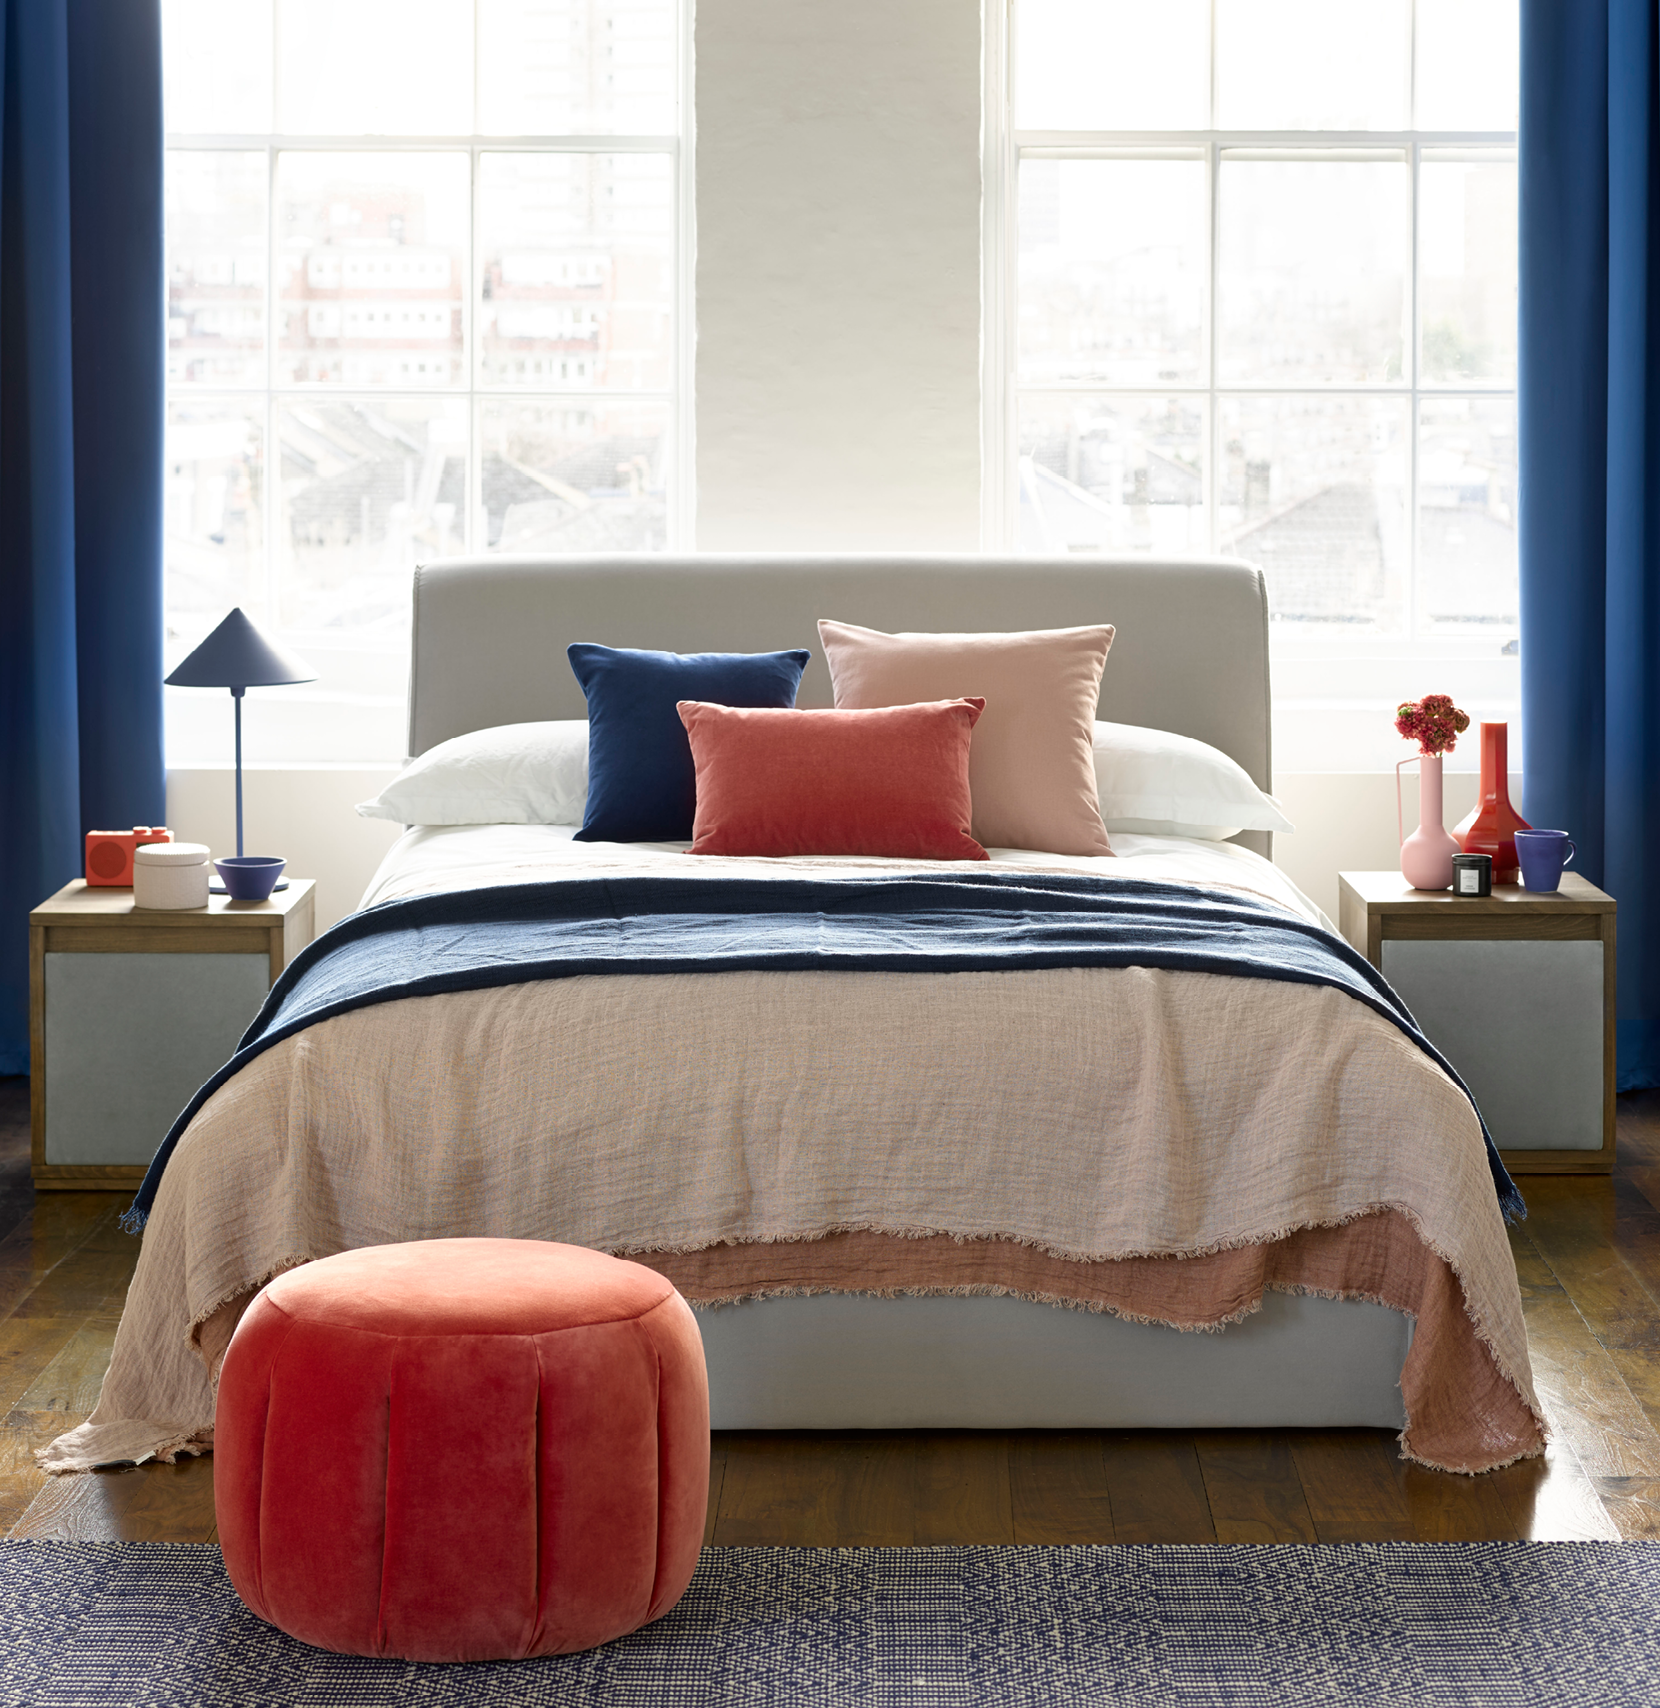 Double-Duty delights for your boudoir - Explore the Jack Wills capsule collection